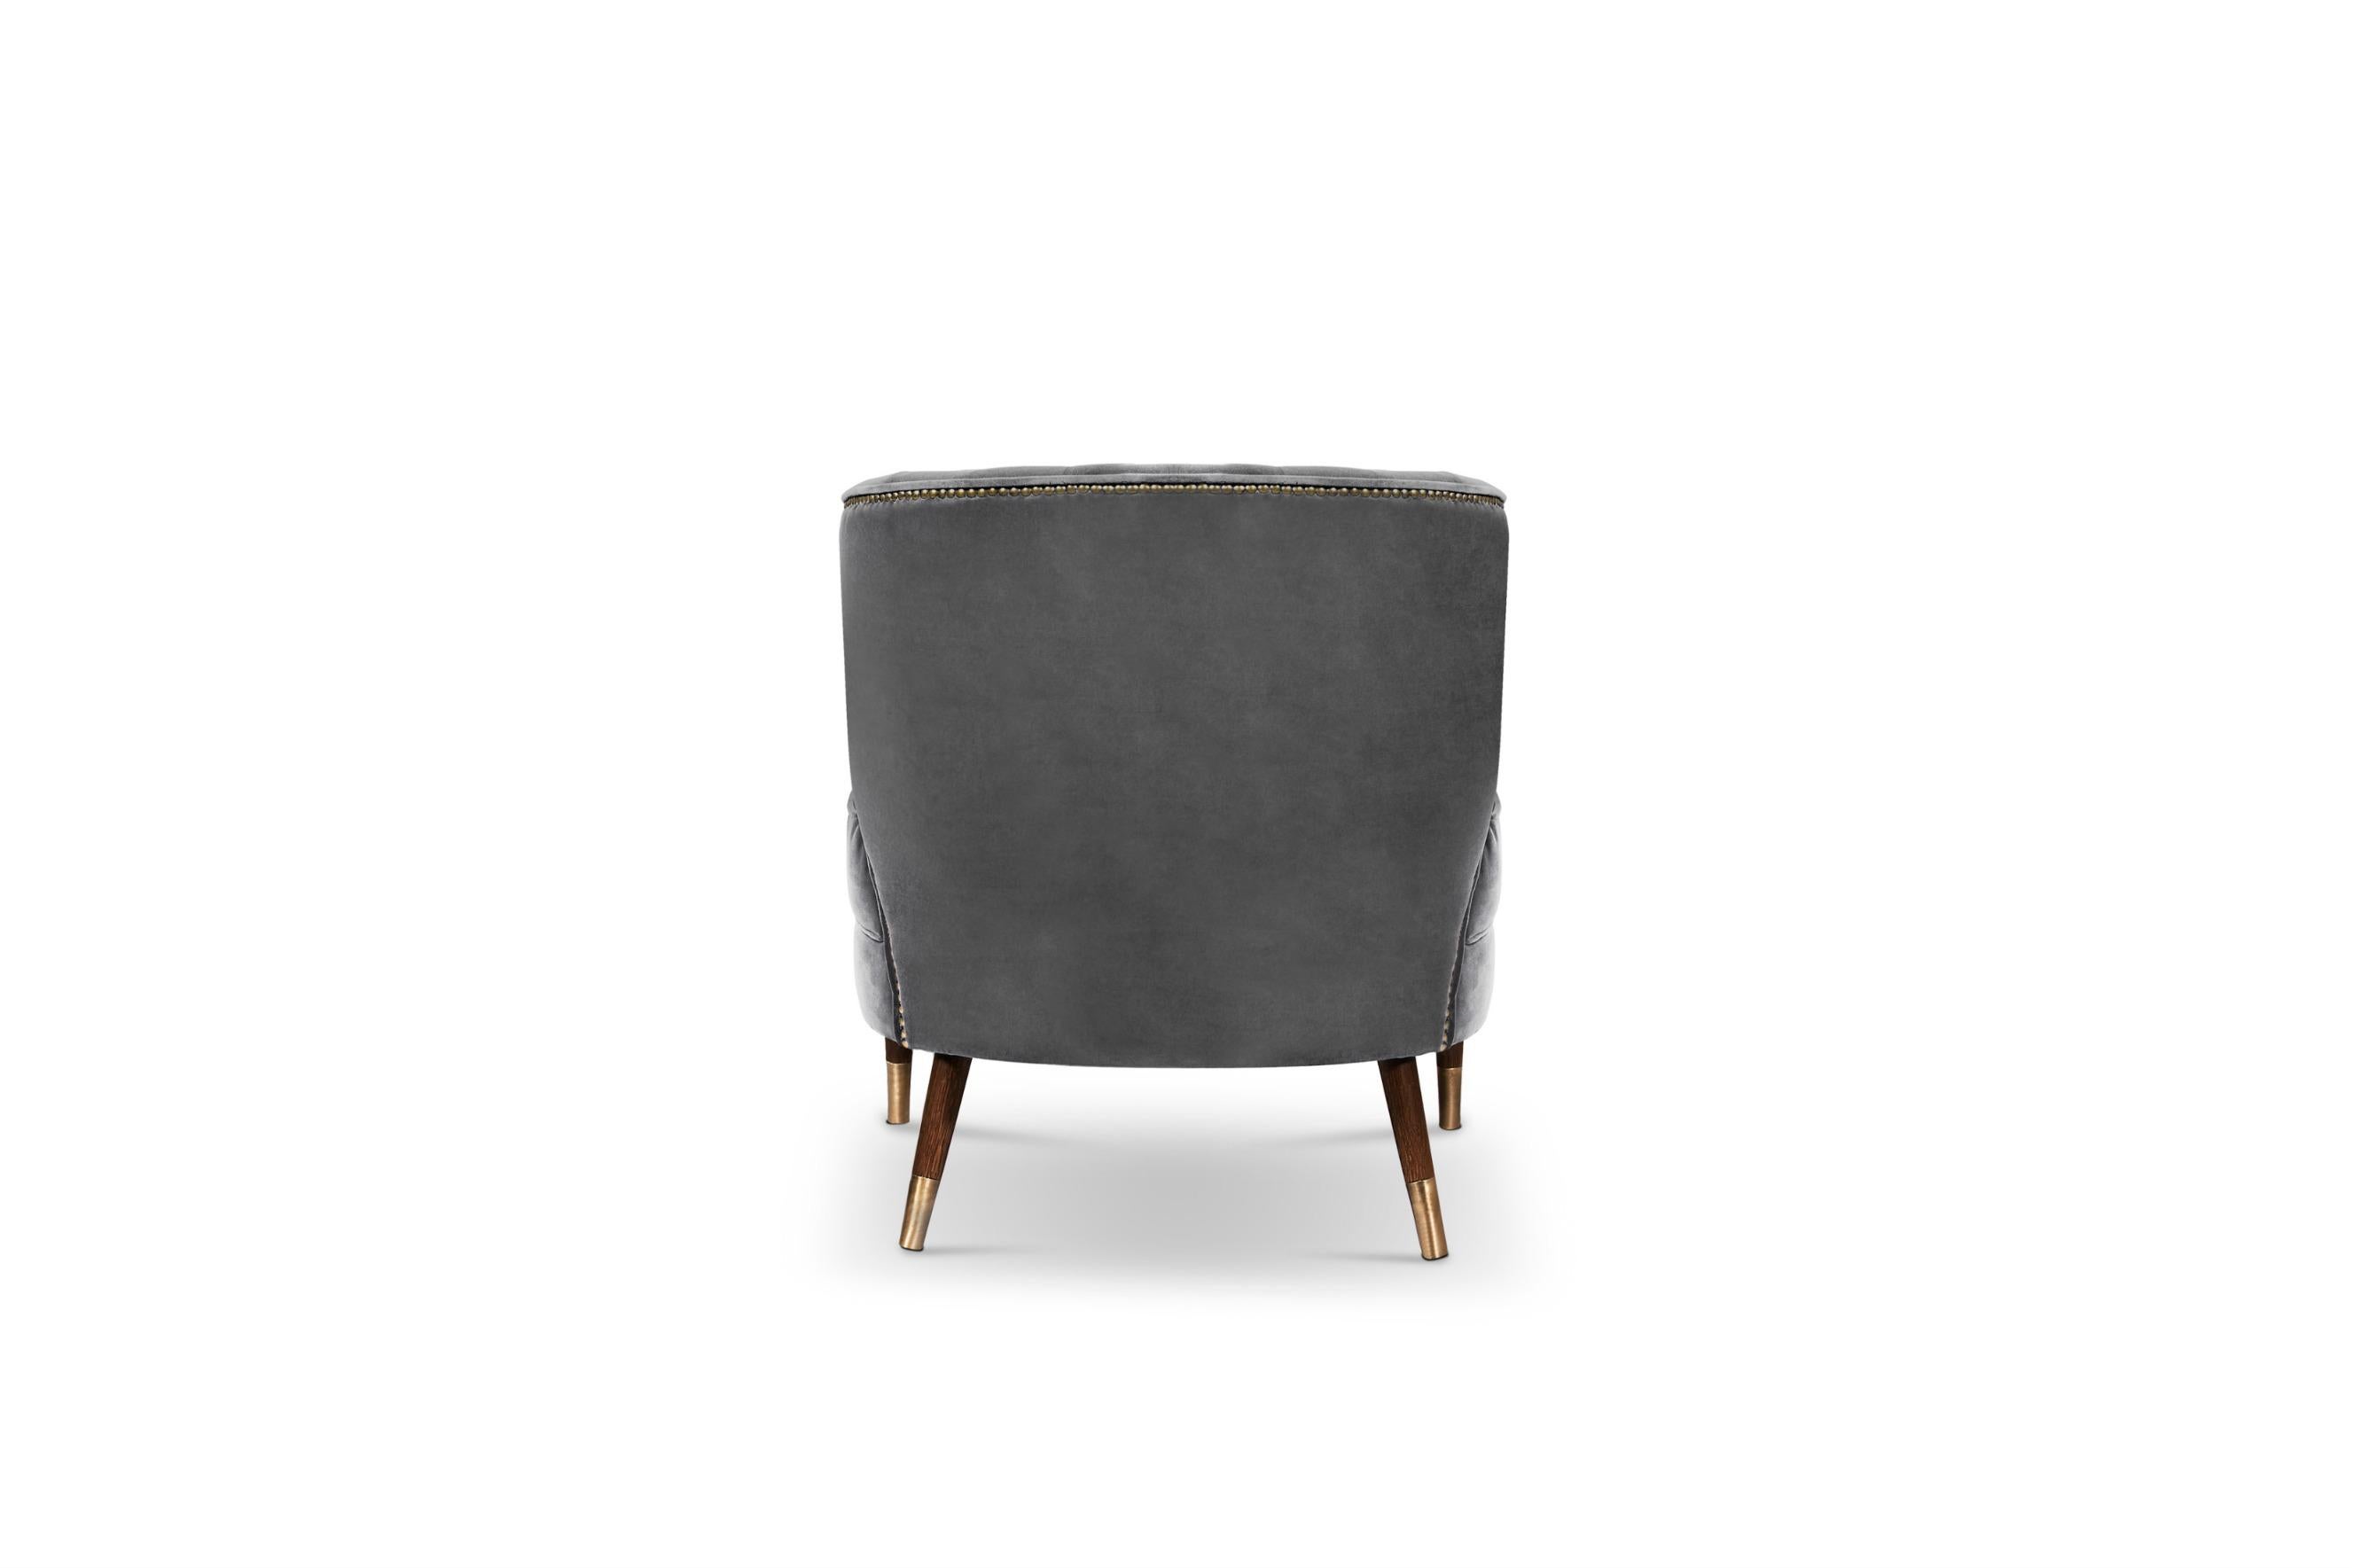 Ibis are beautiful birds known for their long slim legs. Just like Ibis armchair, an elegant seating solution. Upholstered in cotton velvet, this accent chair with an aged brass nailheads trim will be the focal point of any living room